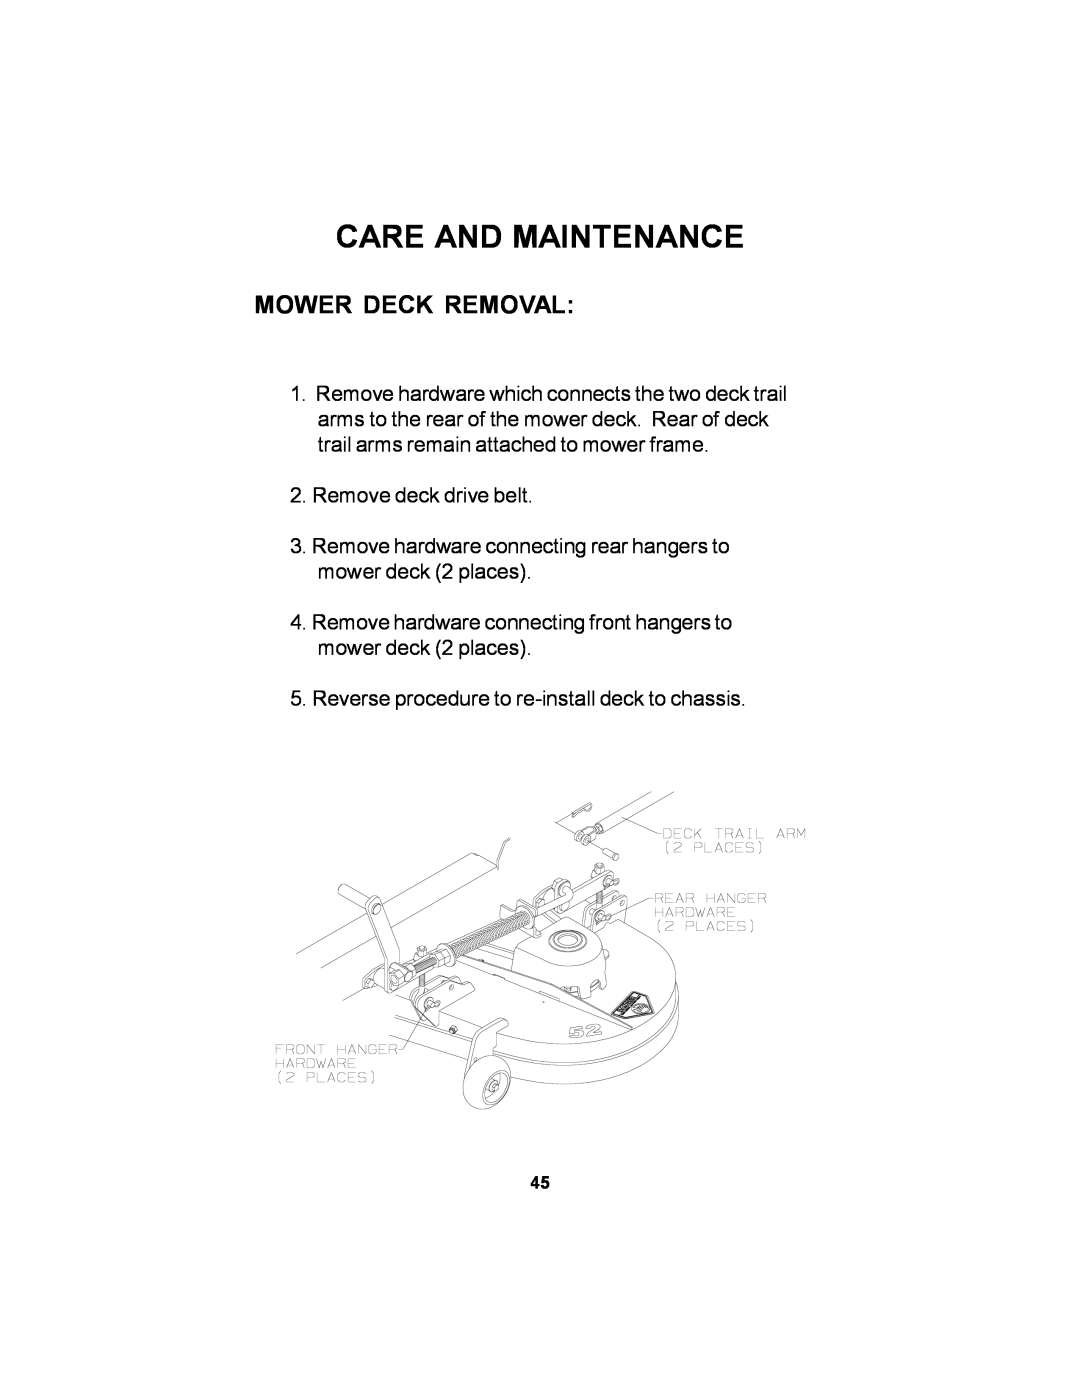 Dixon 18626-106 manual Mower Deck Removal, Care And Maintenance, Remove deck drive belt 